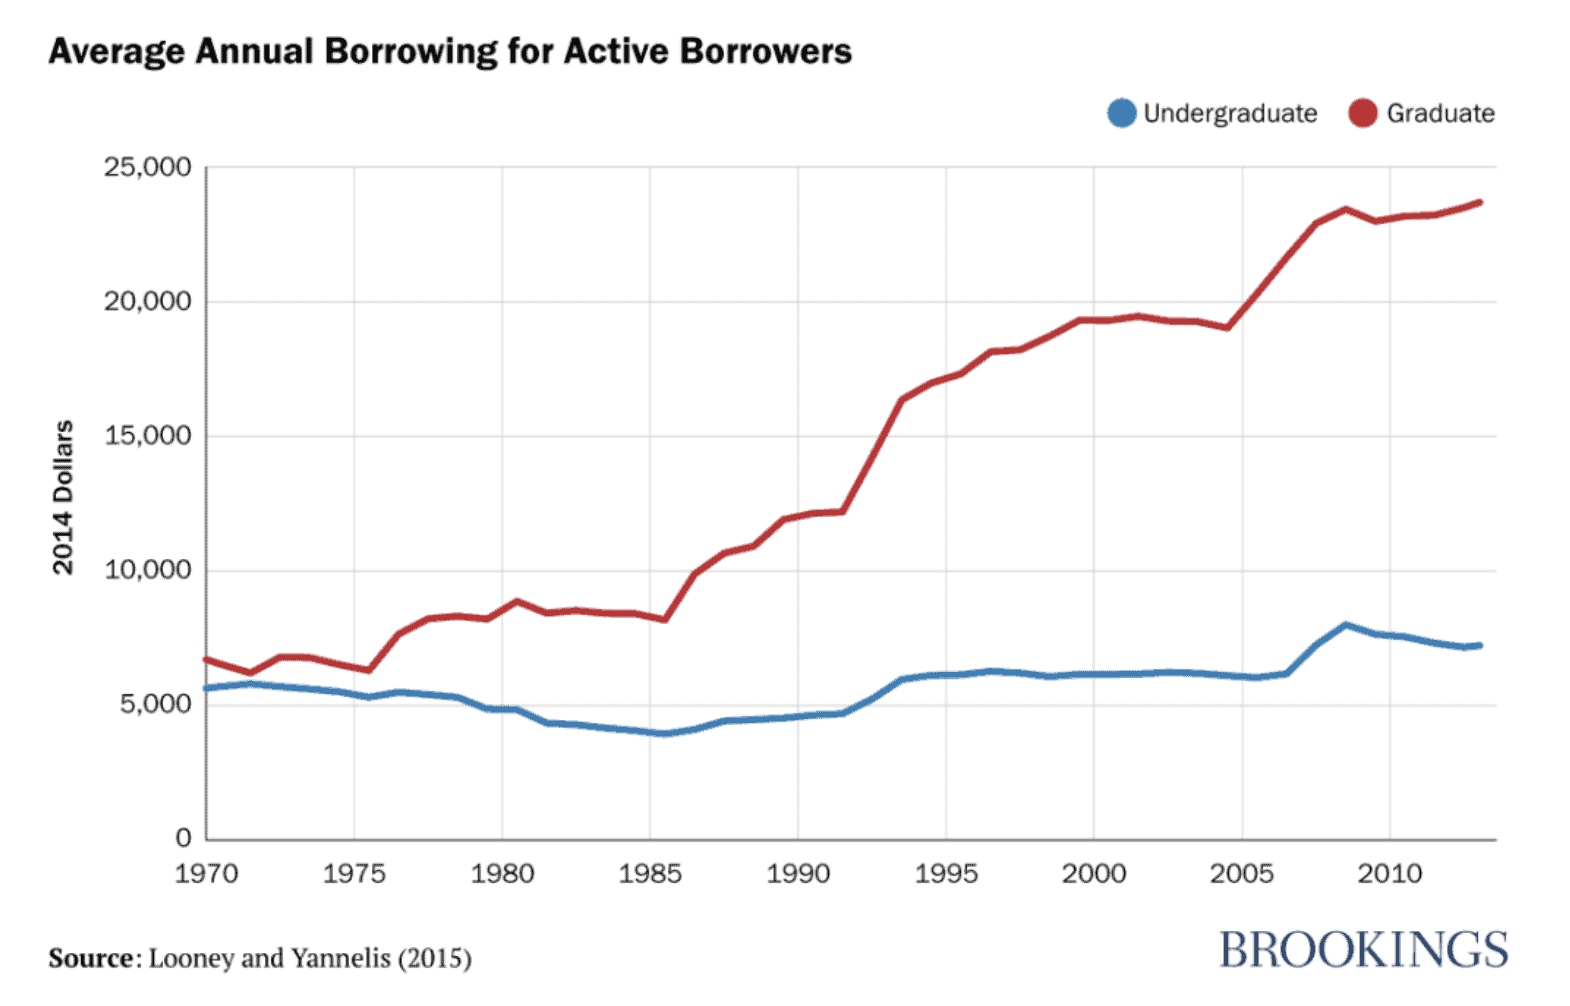 Average annual borrowing from 1970 to the mid 2010s broken out by undergraduate and graduate borrowers.